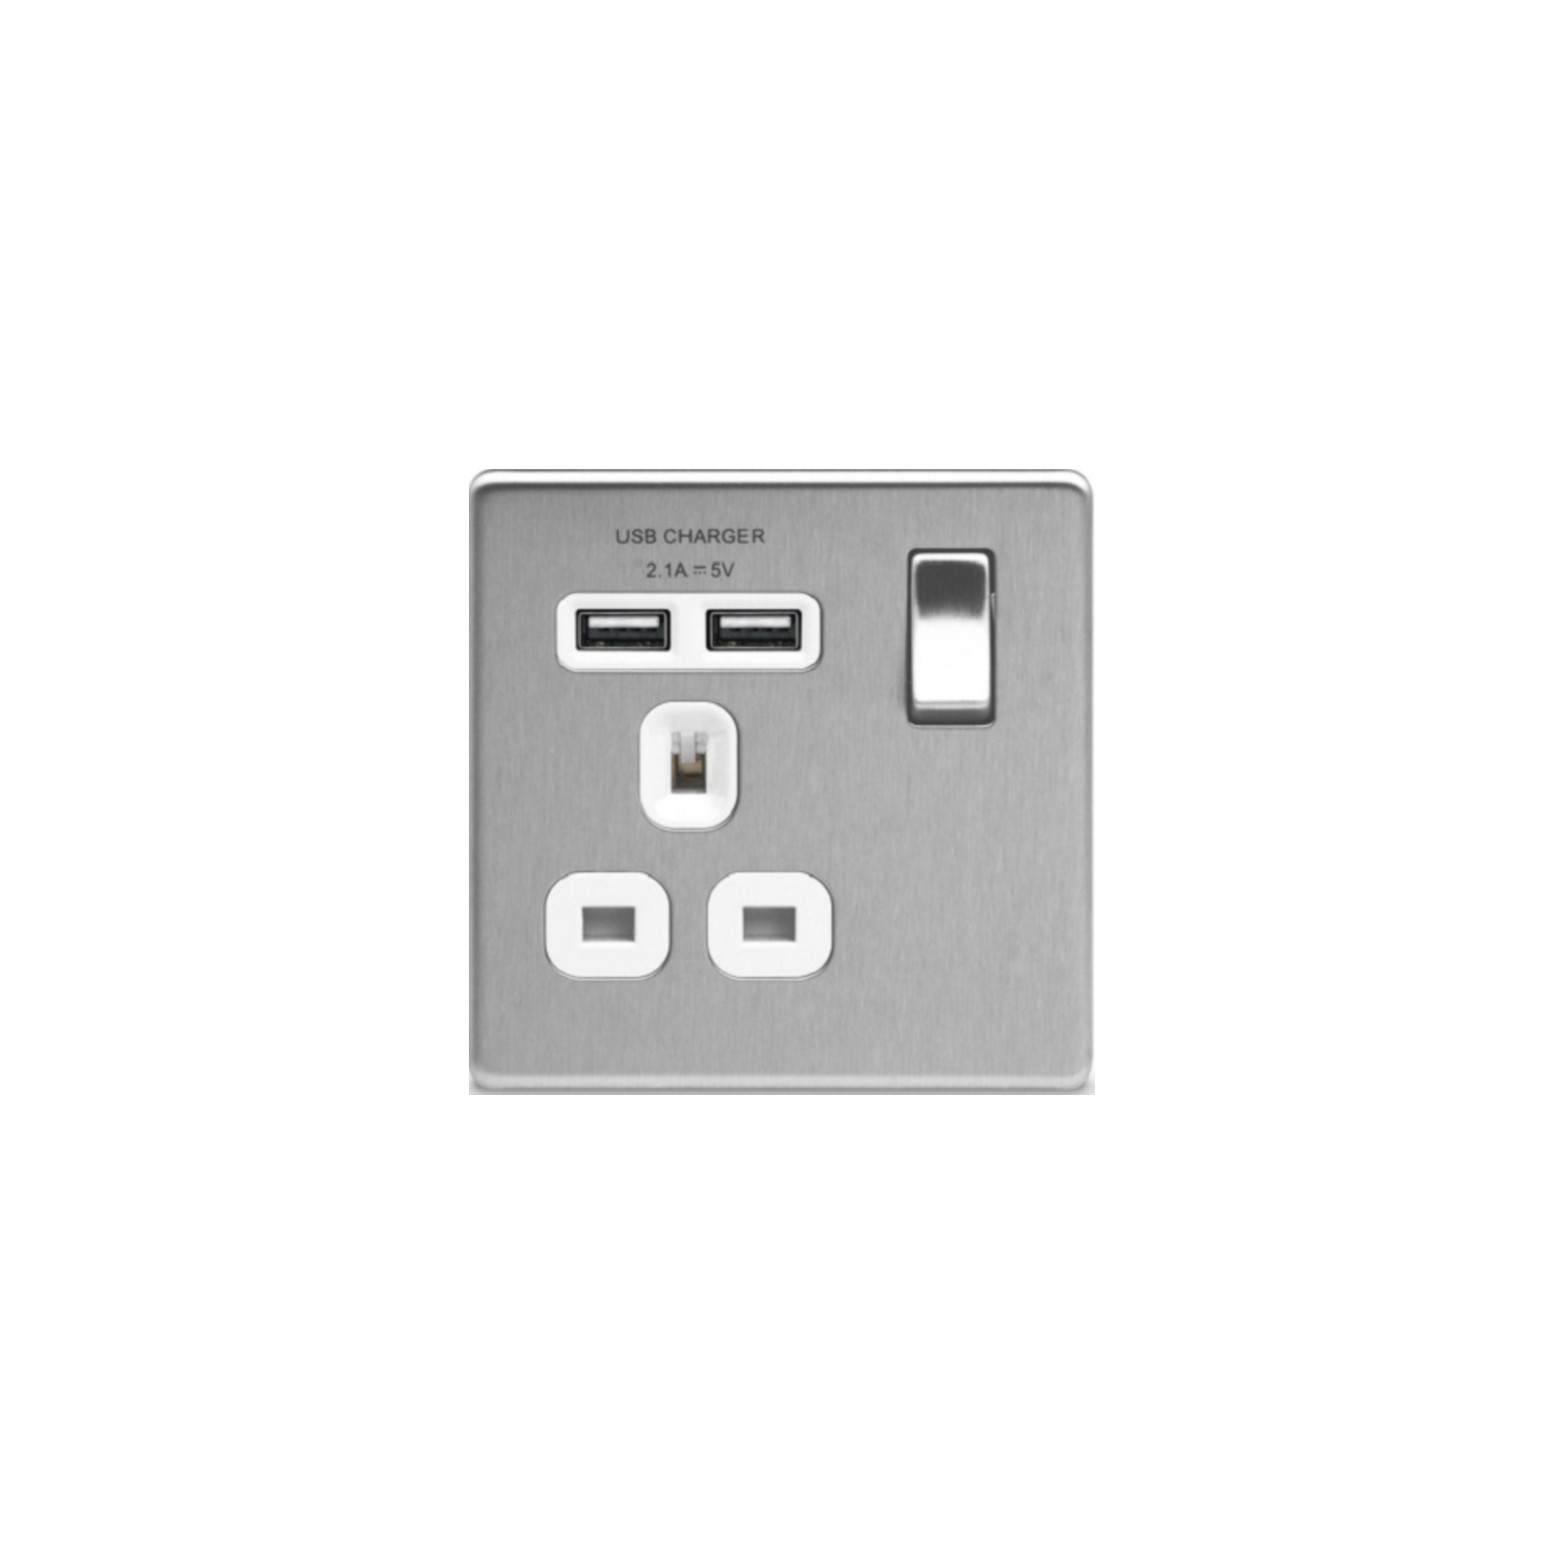 Flatplate Brushed Steel 2USB 2.1A 1-Gang 13A Switched Wall Socket Grey Insert, USB Charger(FBS21U2W)